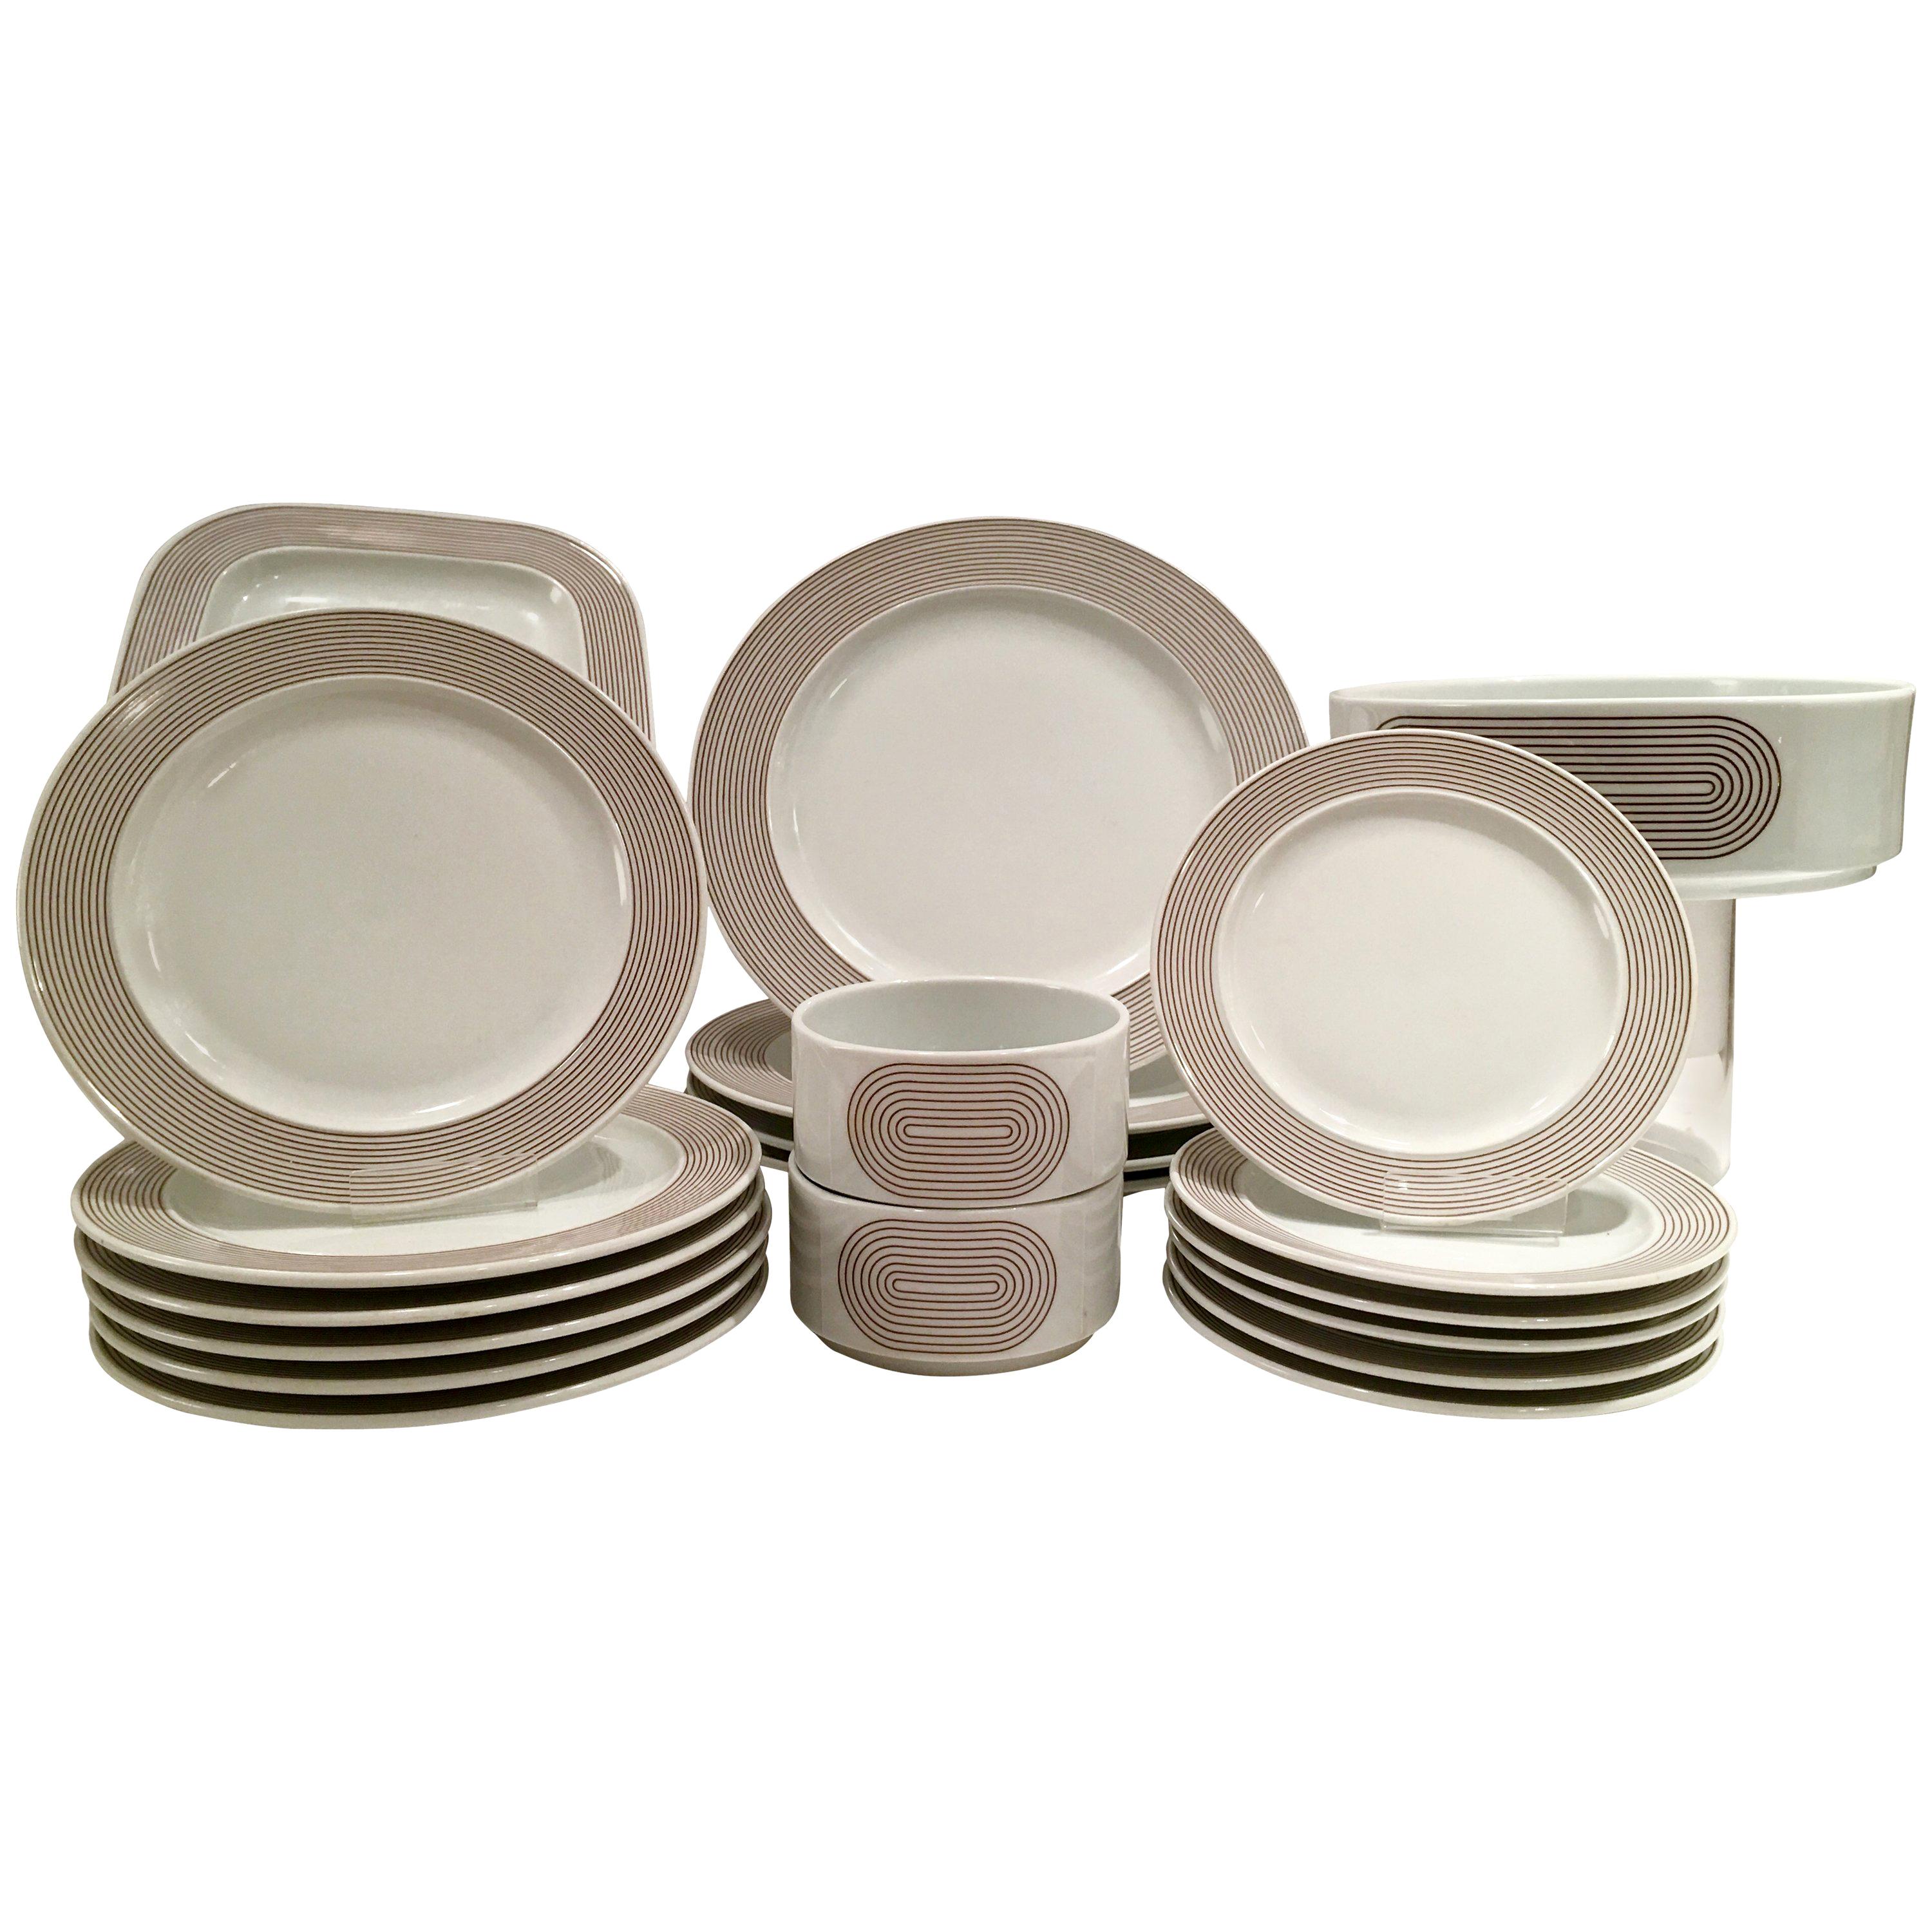 1970s Modern German porcelain dinnerware ‘Joy One’ set of 20 by, Rosenthal. Pattern features a modern and clean lined white ground with brown rings/stripes detail.
Set includes, 4 dinner plates, 10.5 diameter, 6 bread/butter plates, 6.50